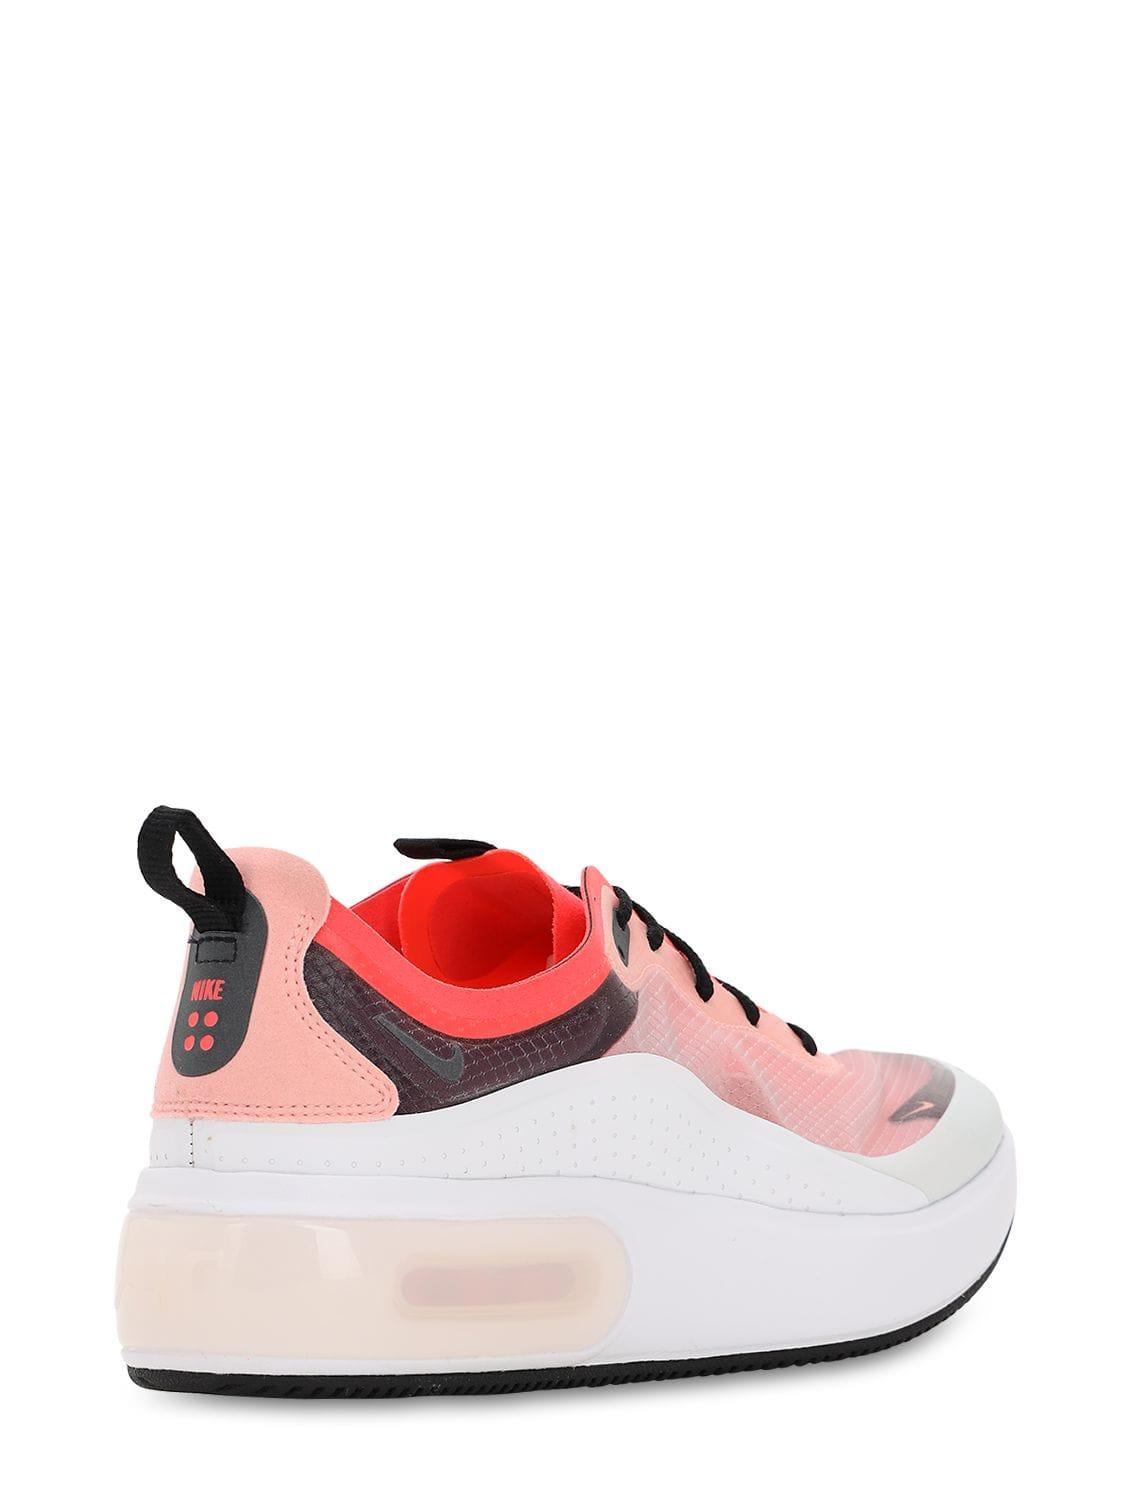 Nike Air Max Dia Se Qs Sneakers in White/Pink (Pink) - Lyst